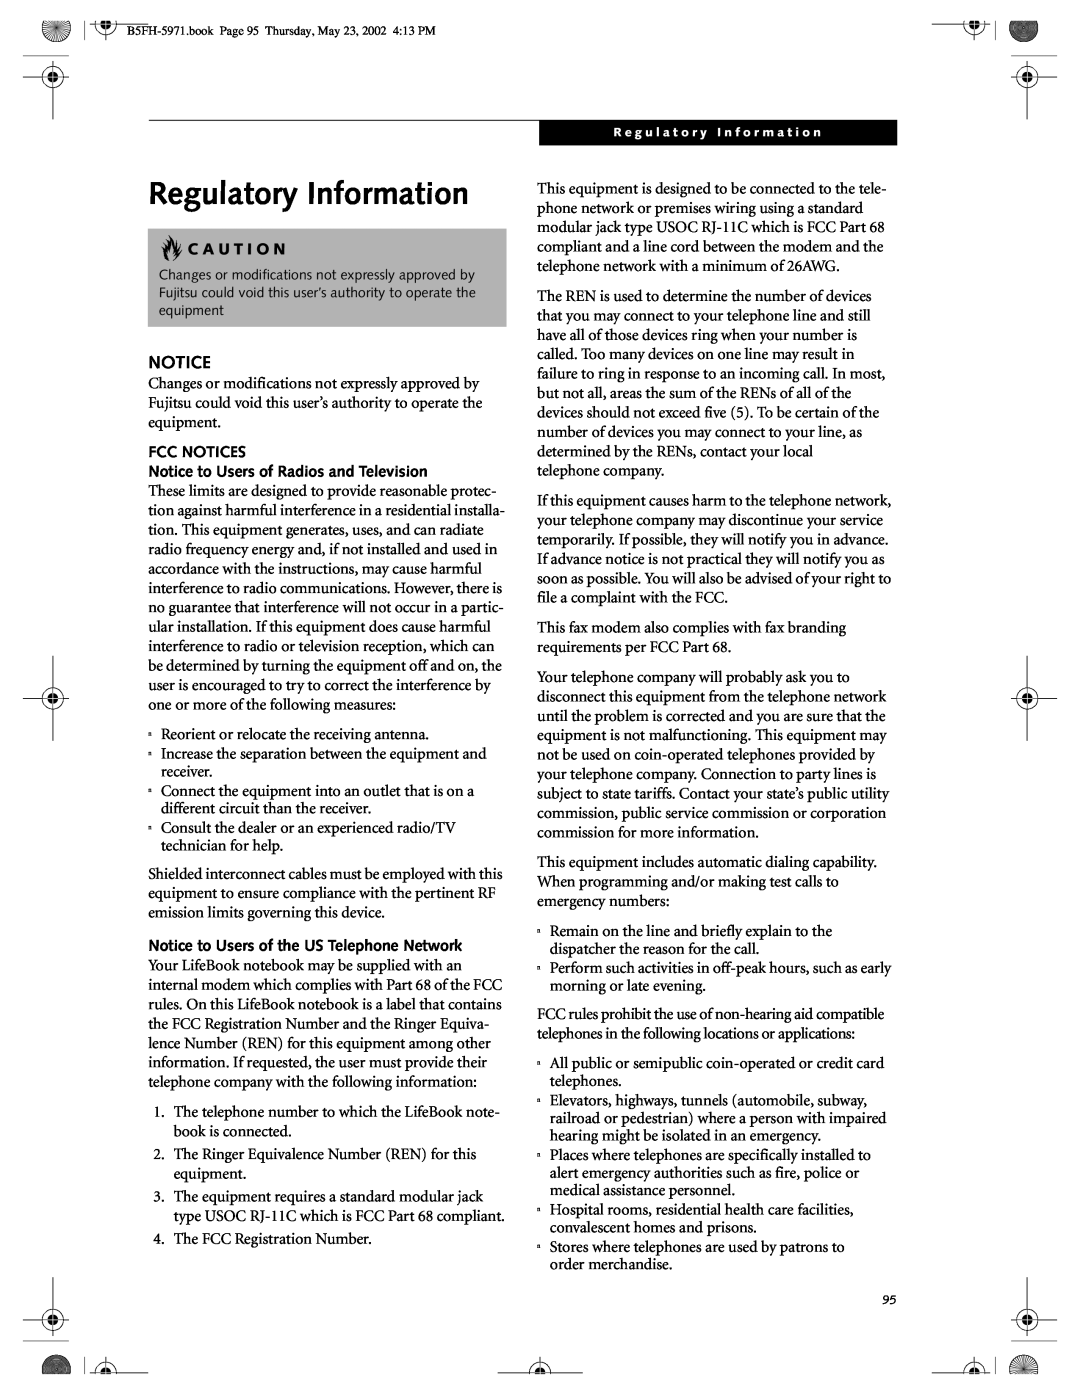 Fujitsu C2010, C2111 manual Regulatory Information, C A U T I O N, FCC NOTICES Notice to Users of Radios and Television 